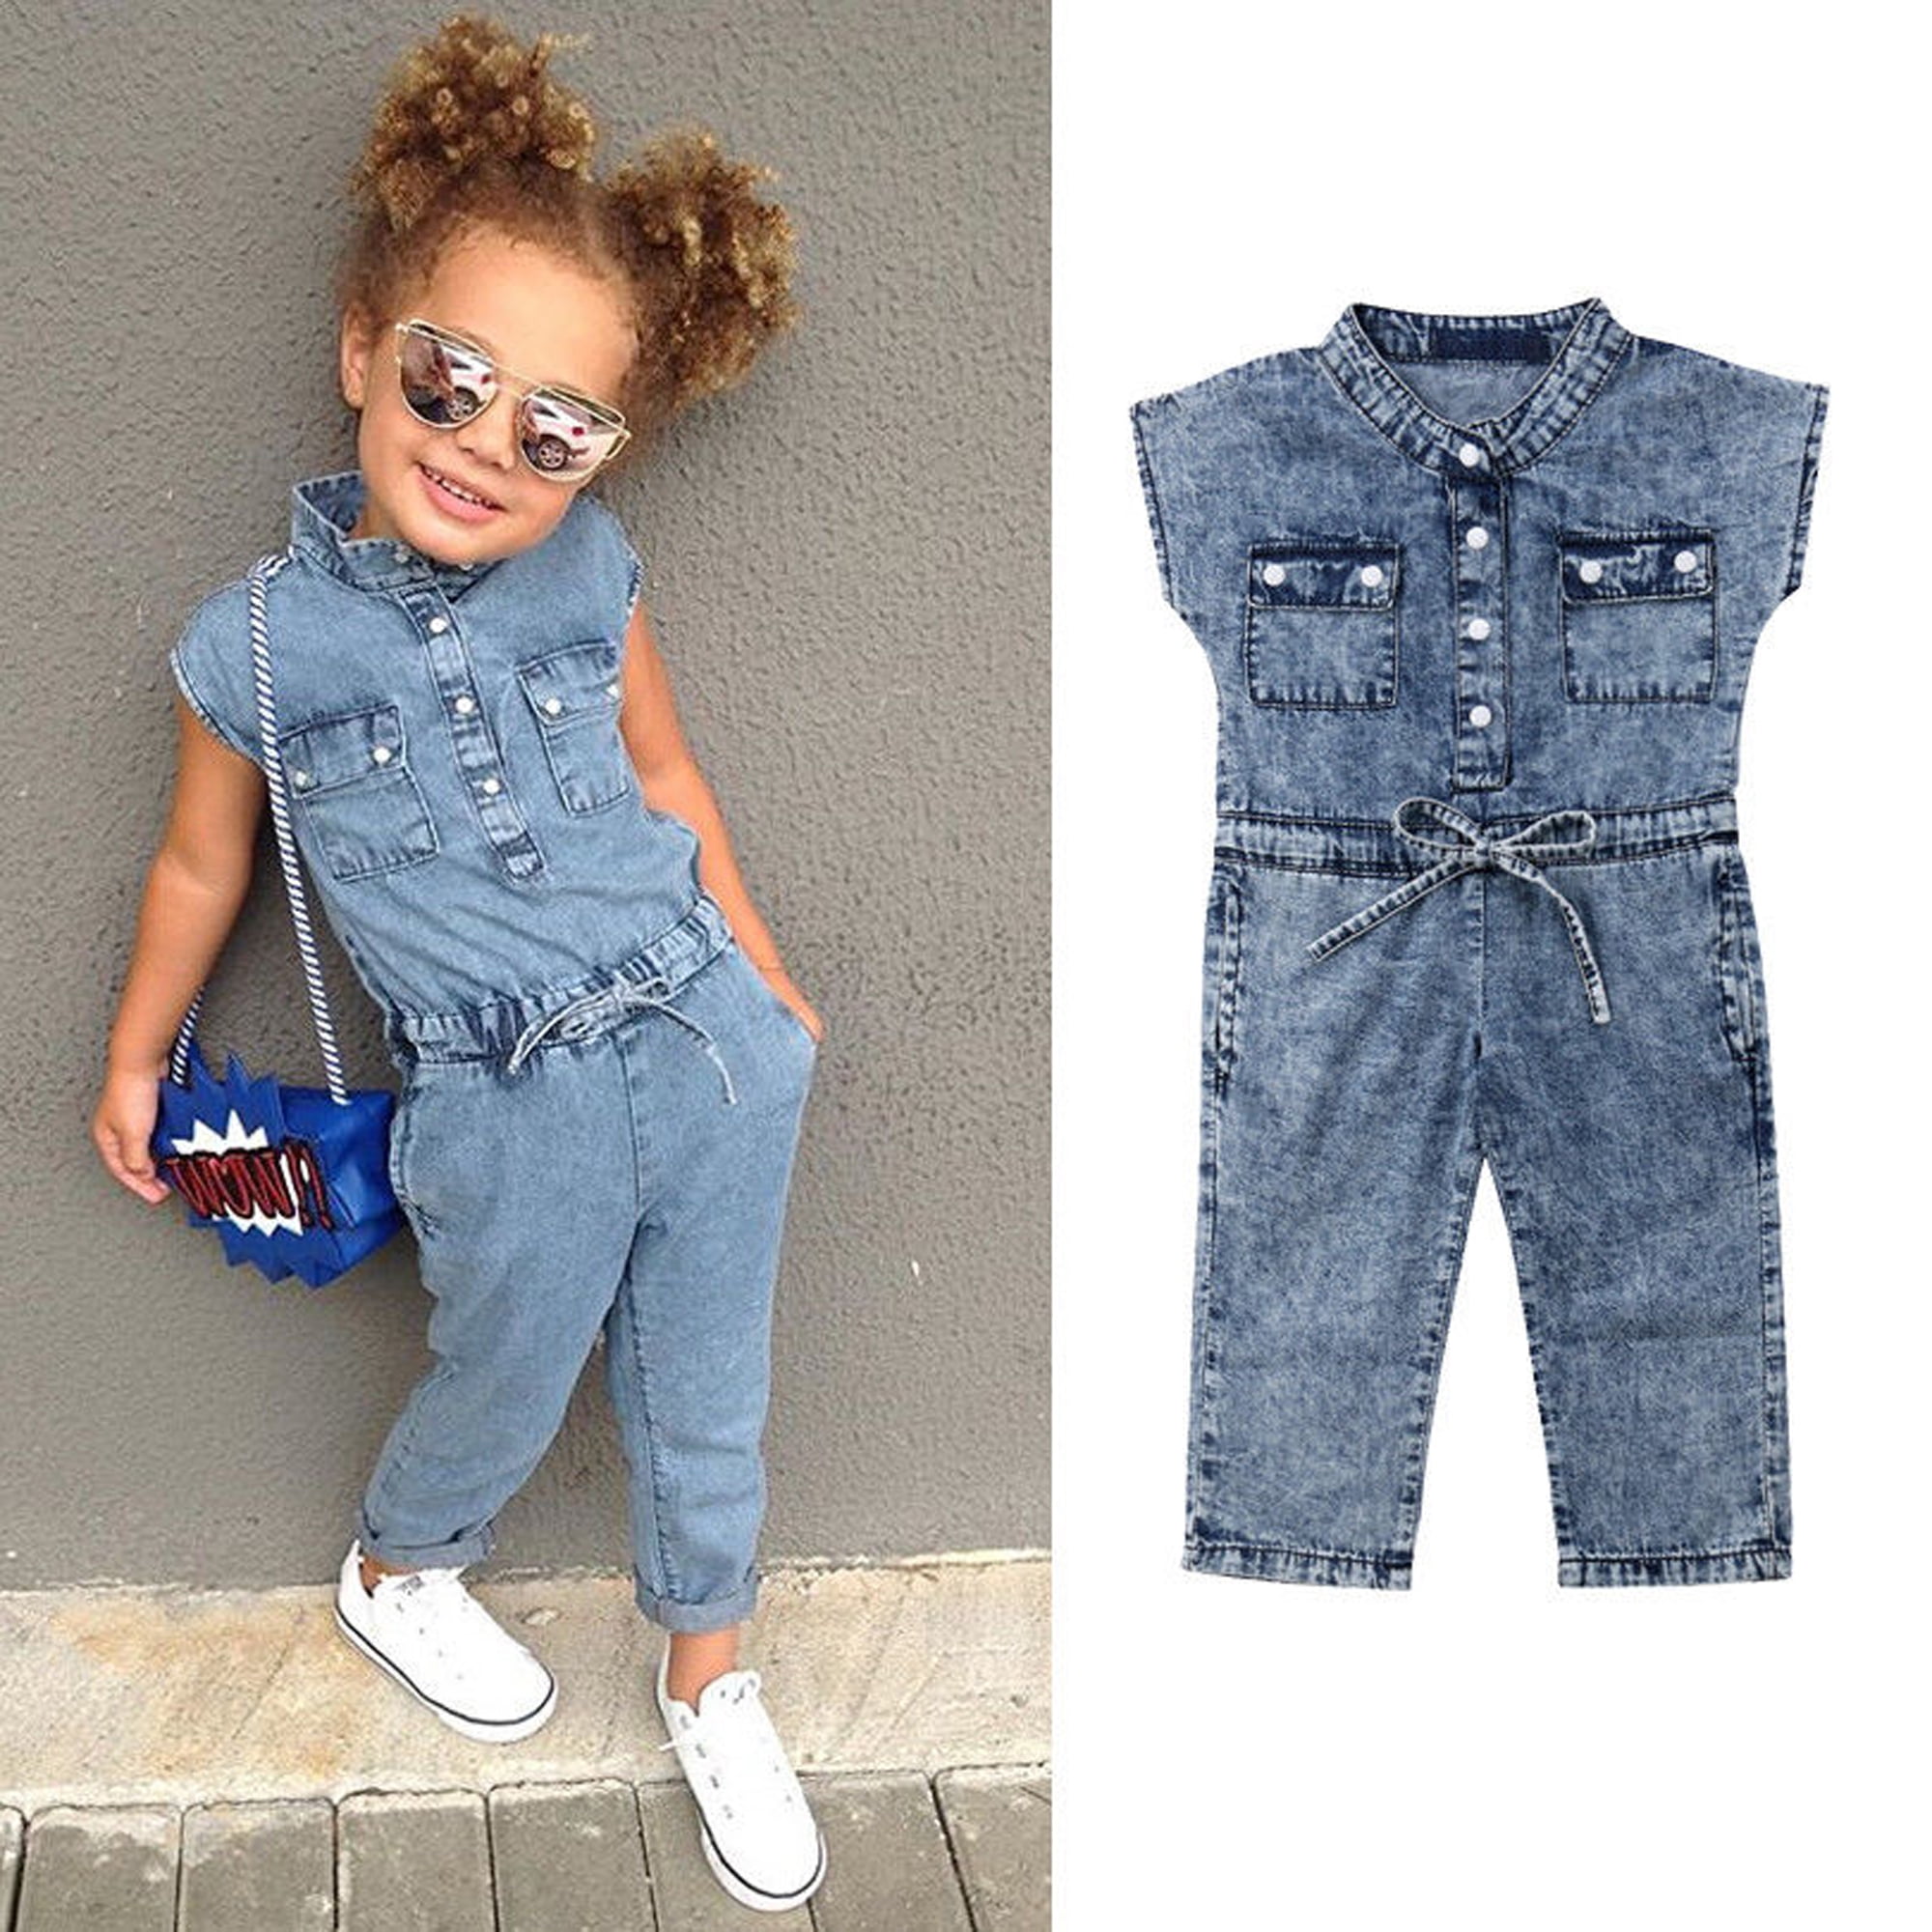 Cute Toddler Kids Baby Girl Bird Black Romper Jumpsuit Trousers Summer Clothes 